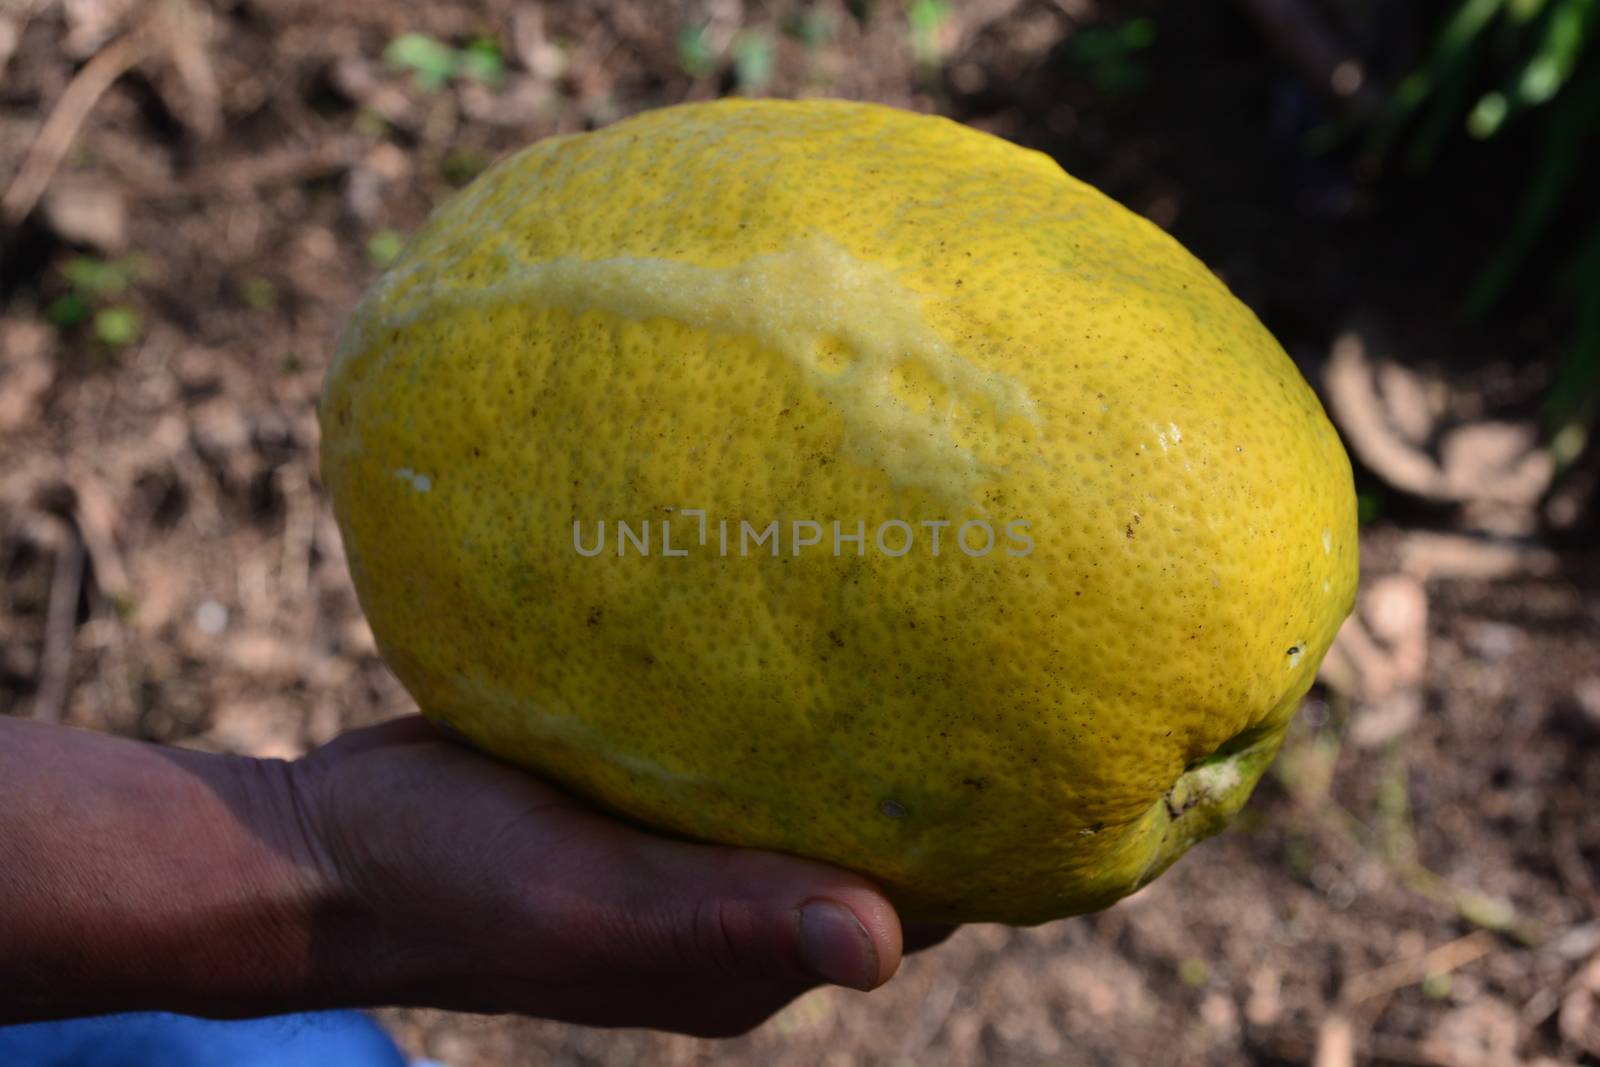 photo of very fresh strange fruits name "Yemenite citron" such as Buddha's hand, can be found in India and China